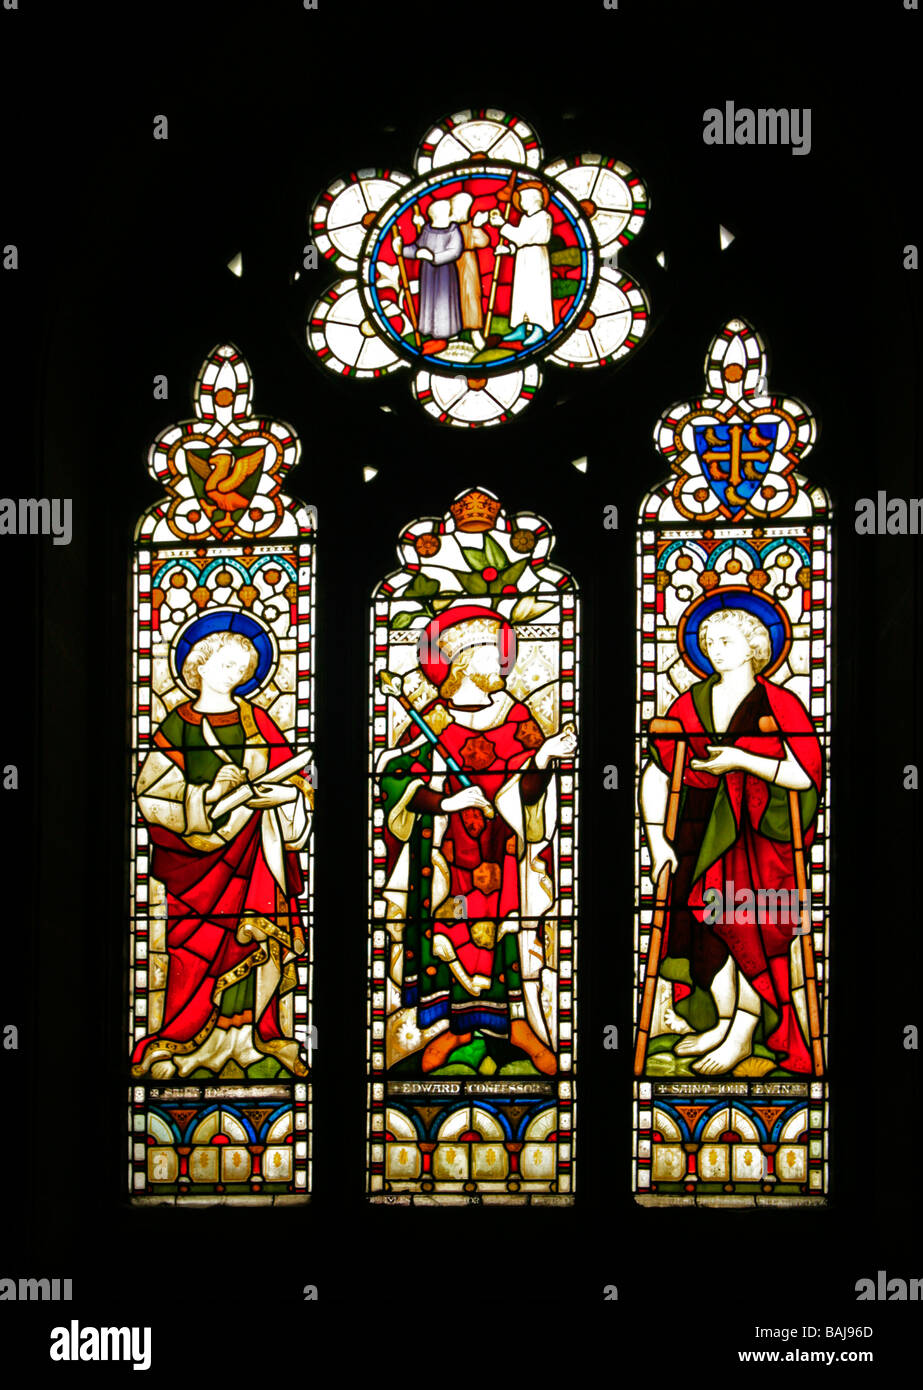 A Stained Glass Window Leek Church Depicting Edward the Confessor Stock Photo